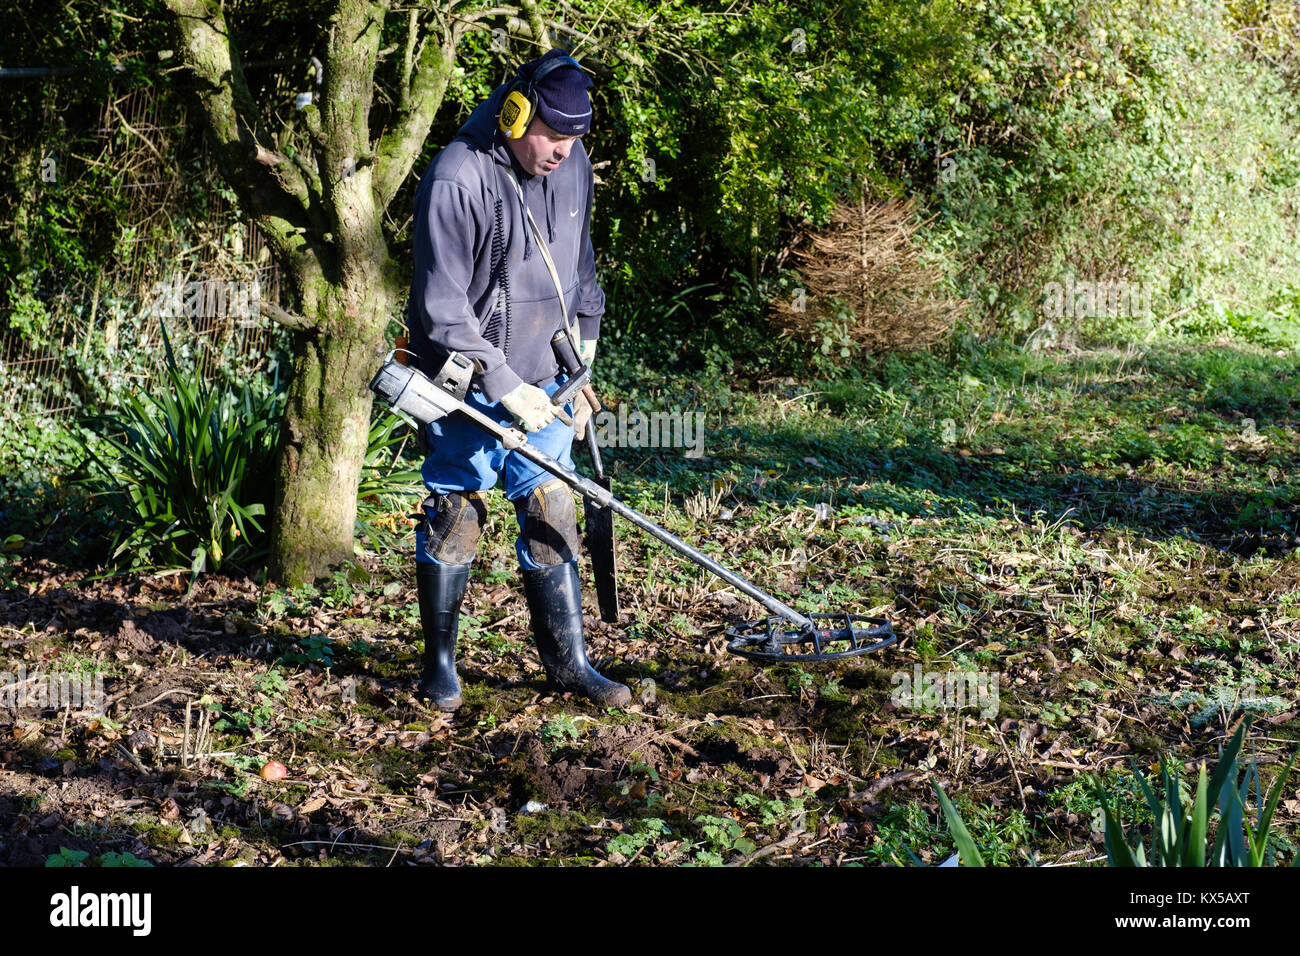 MAN METAL DETECTING WITH METAL DETECTING EQUIPMENT  IN OLD ORCHARD. UK Stock Photo